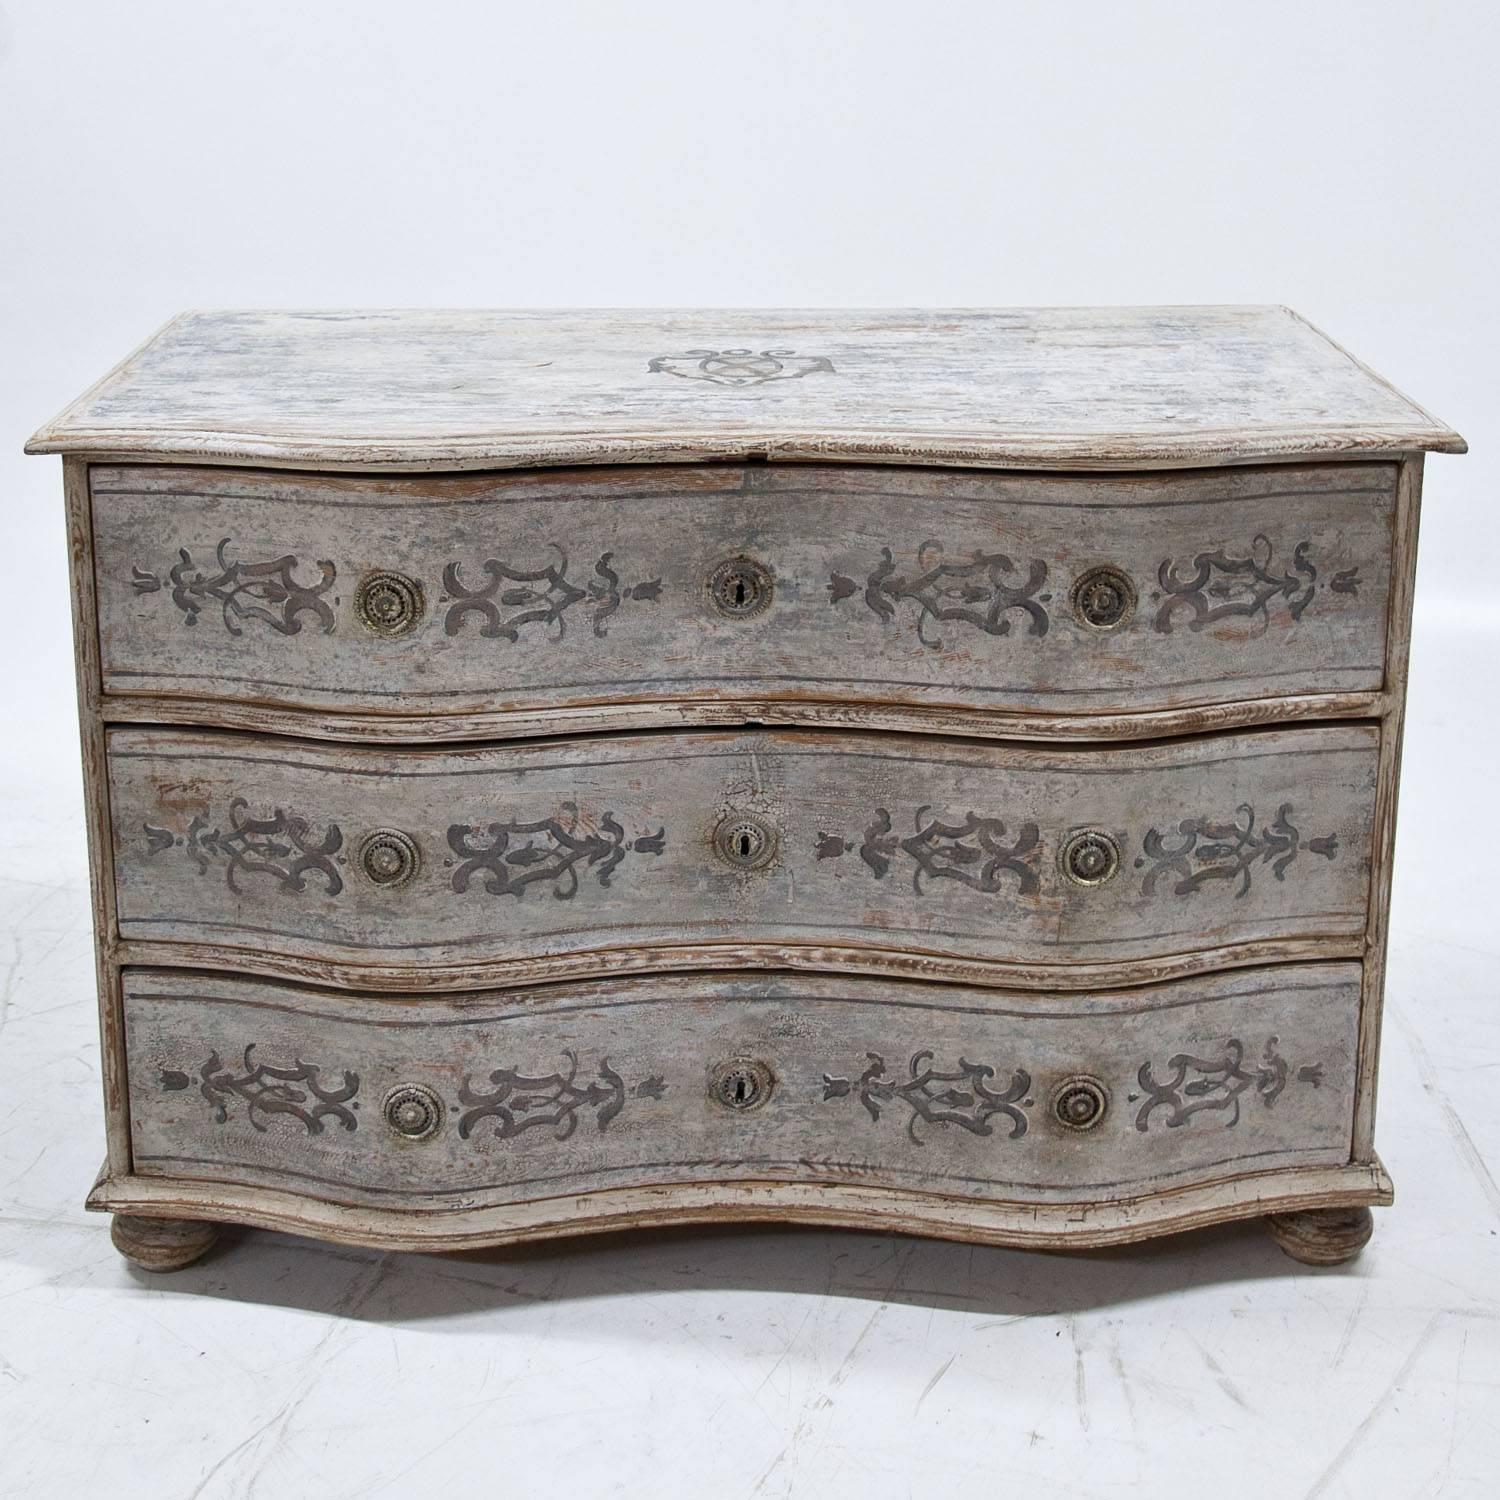 Baroque chest of drawers on bun feet with three drawers and a serpentine front. The Gustavian-style paint is new and done after traditional models. The chest has a decorative worn look to it.